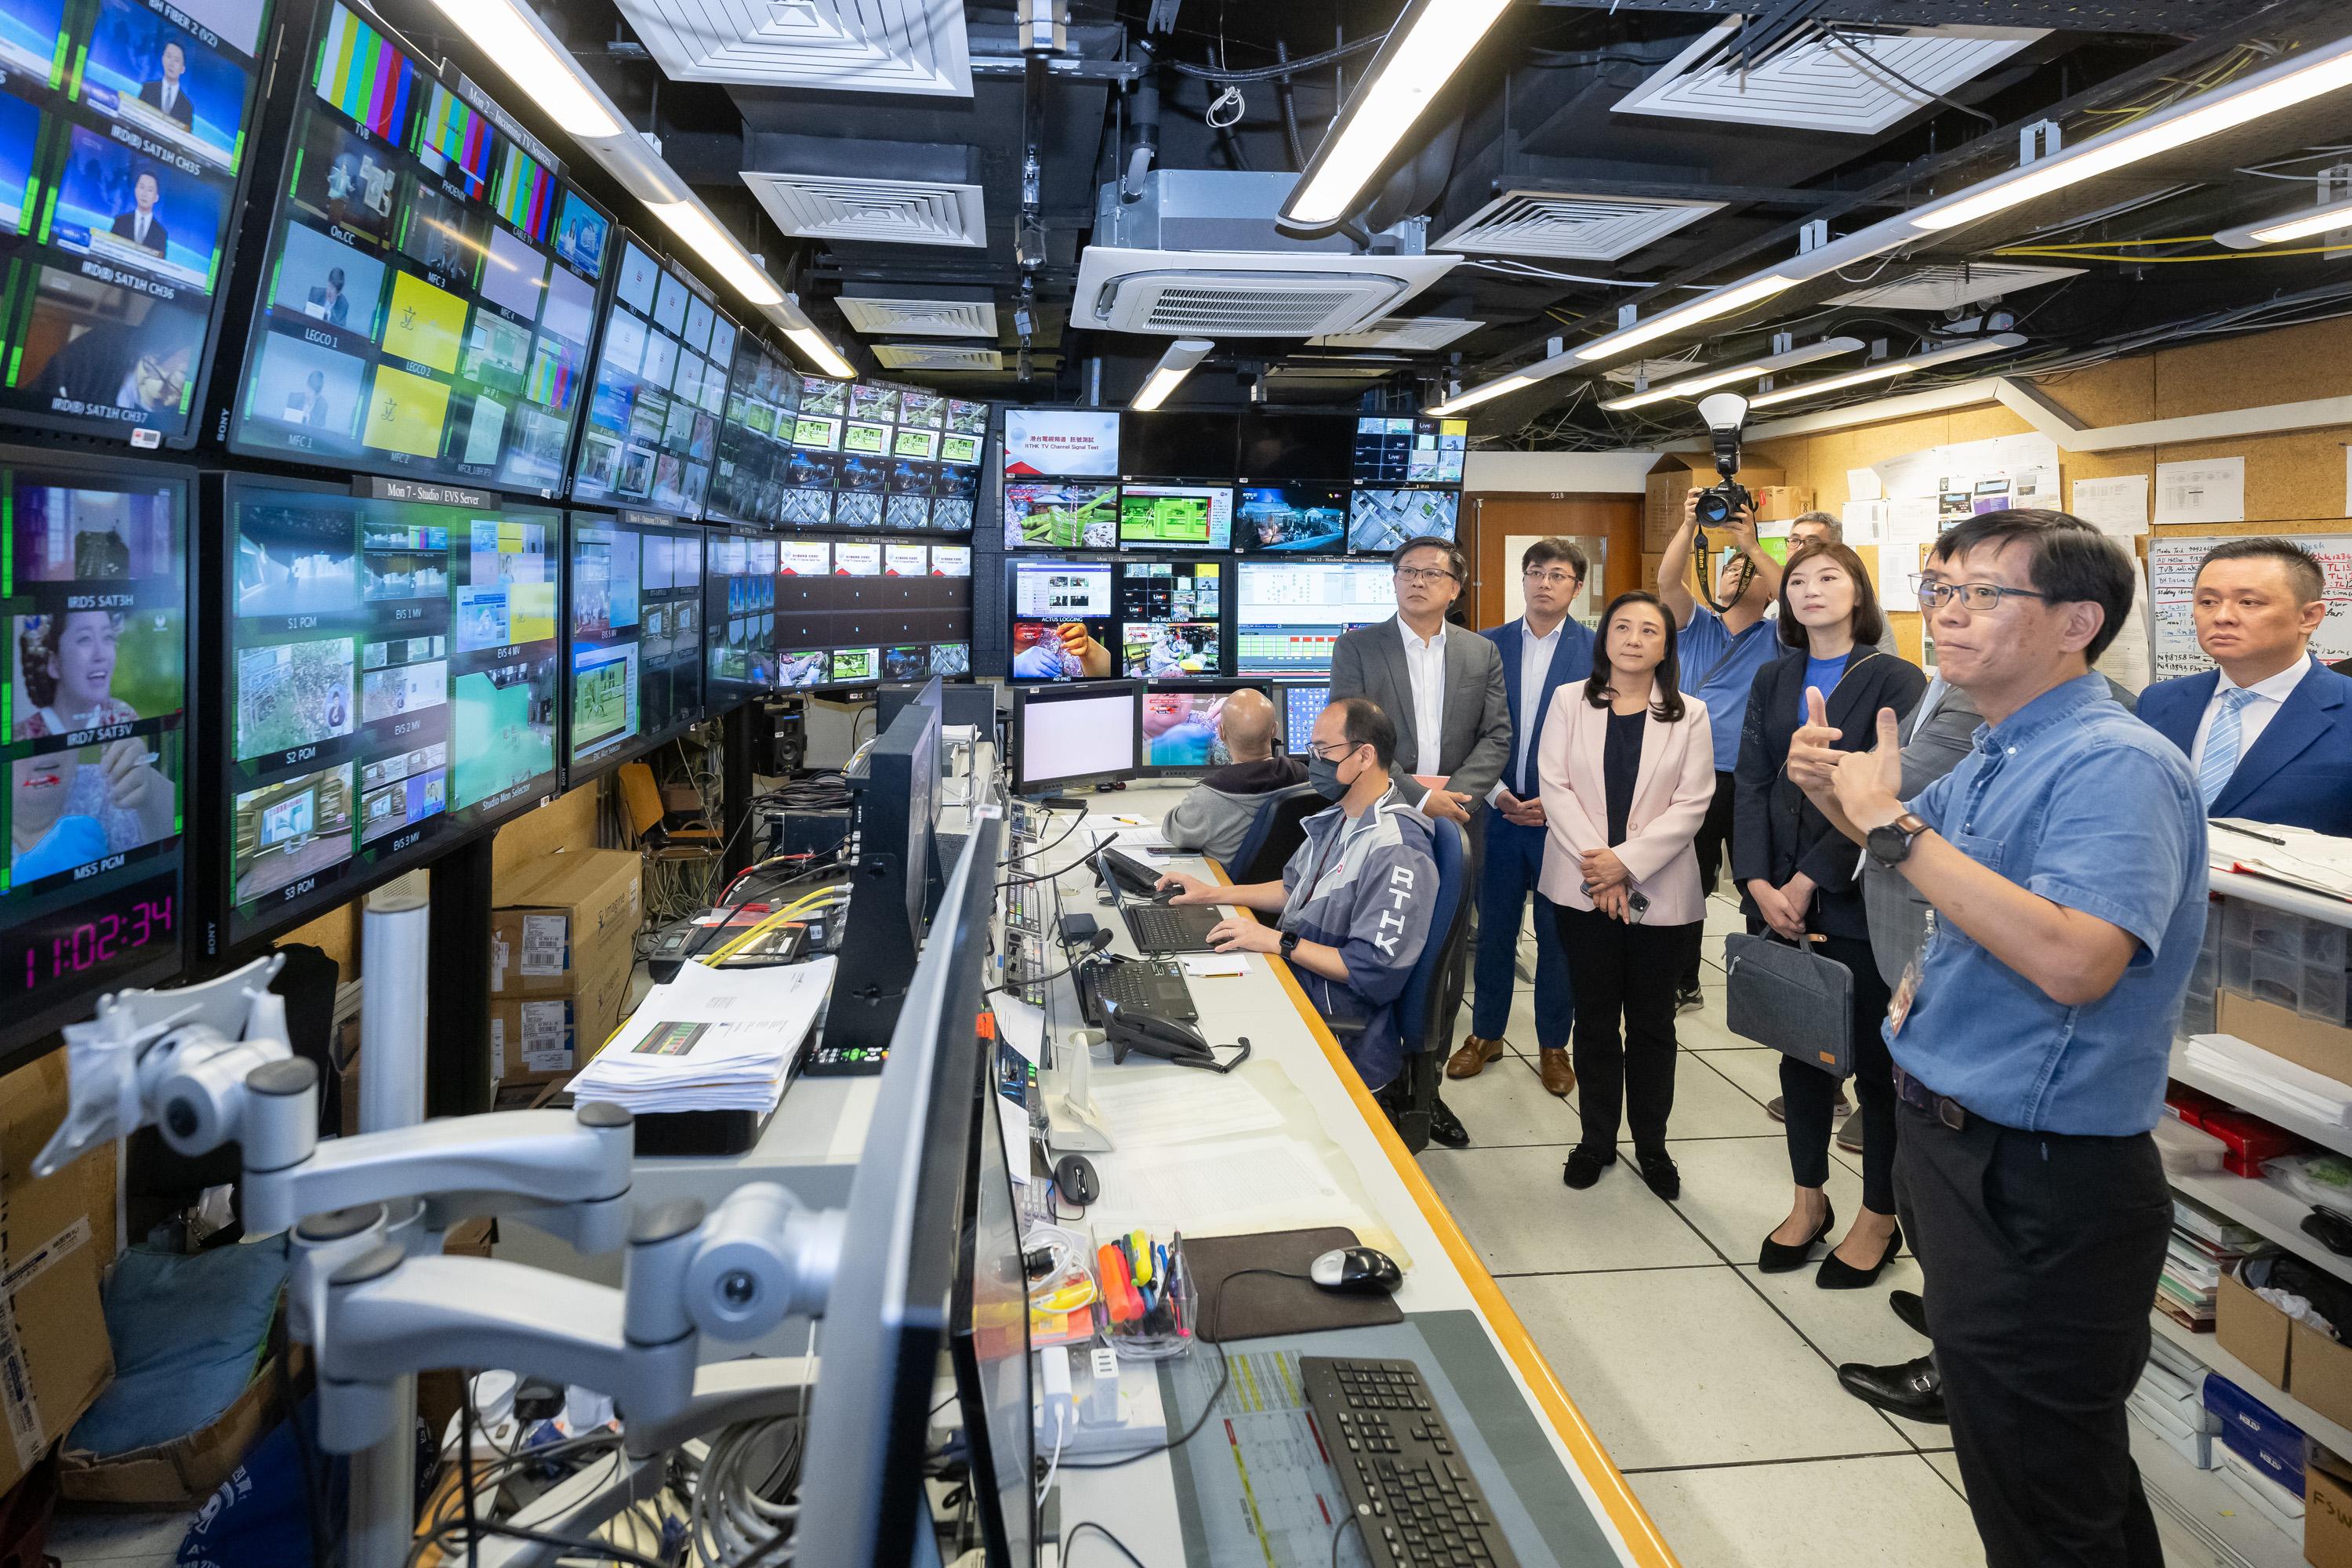 The Legislative Council (LegCo) Panel on Information Technology and Broadcasting visits Radio Television Hong Kong today (June 16) to enhance Members' understanding of the work of the public service broadcaster. Photo shows LegCo Members visiting the TV master control rooms at Television House.